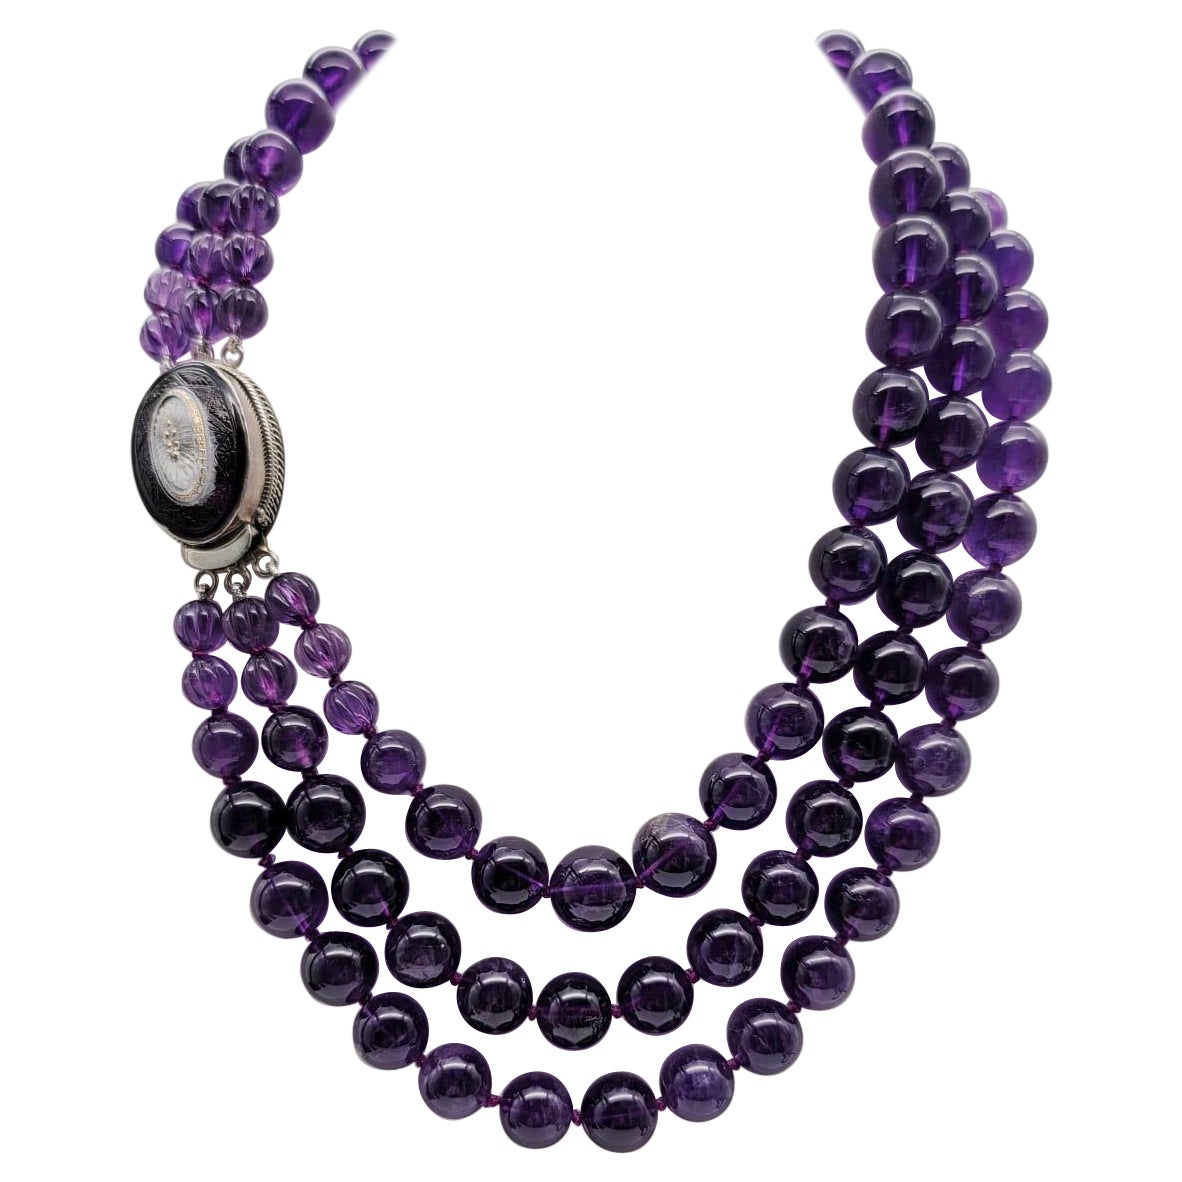 A.Jeschel Natural Amethyst Bead Necklace with signature clasp. For Sale ...